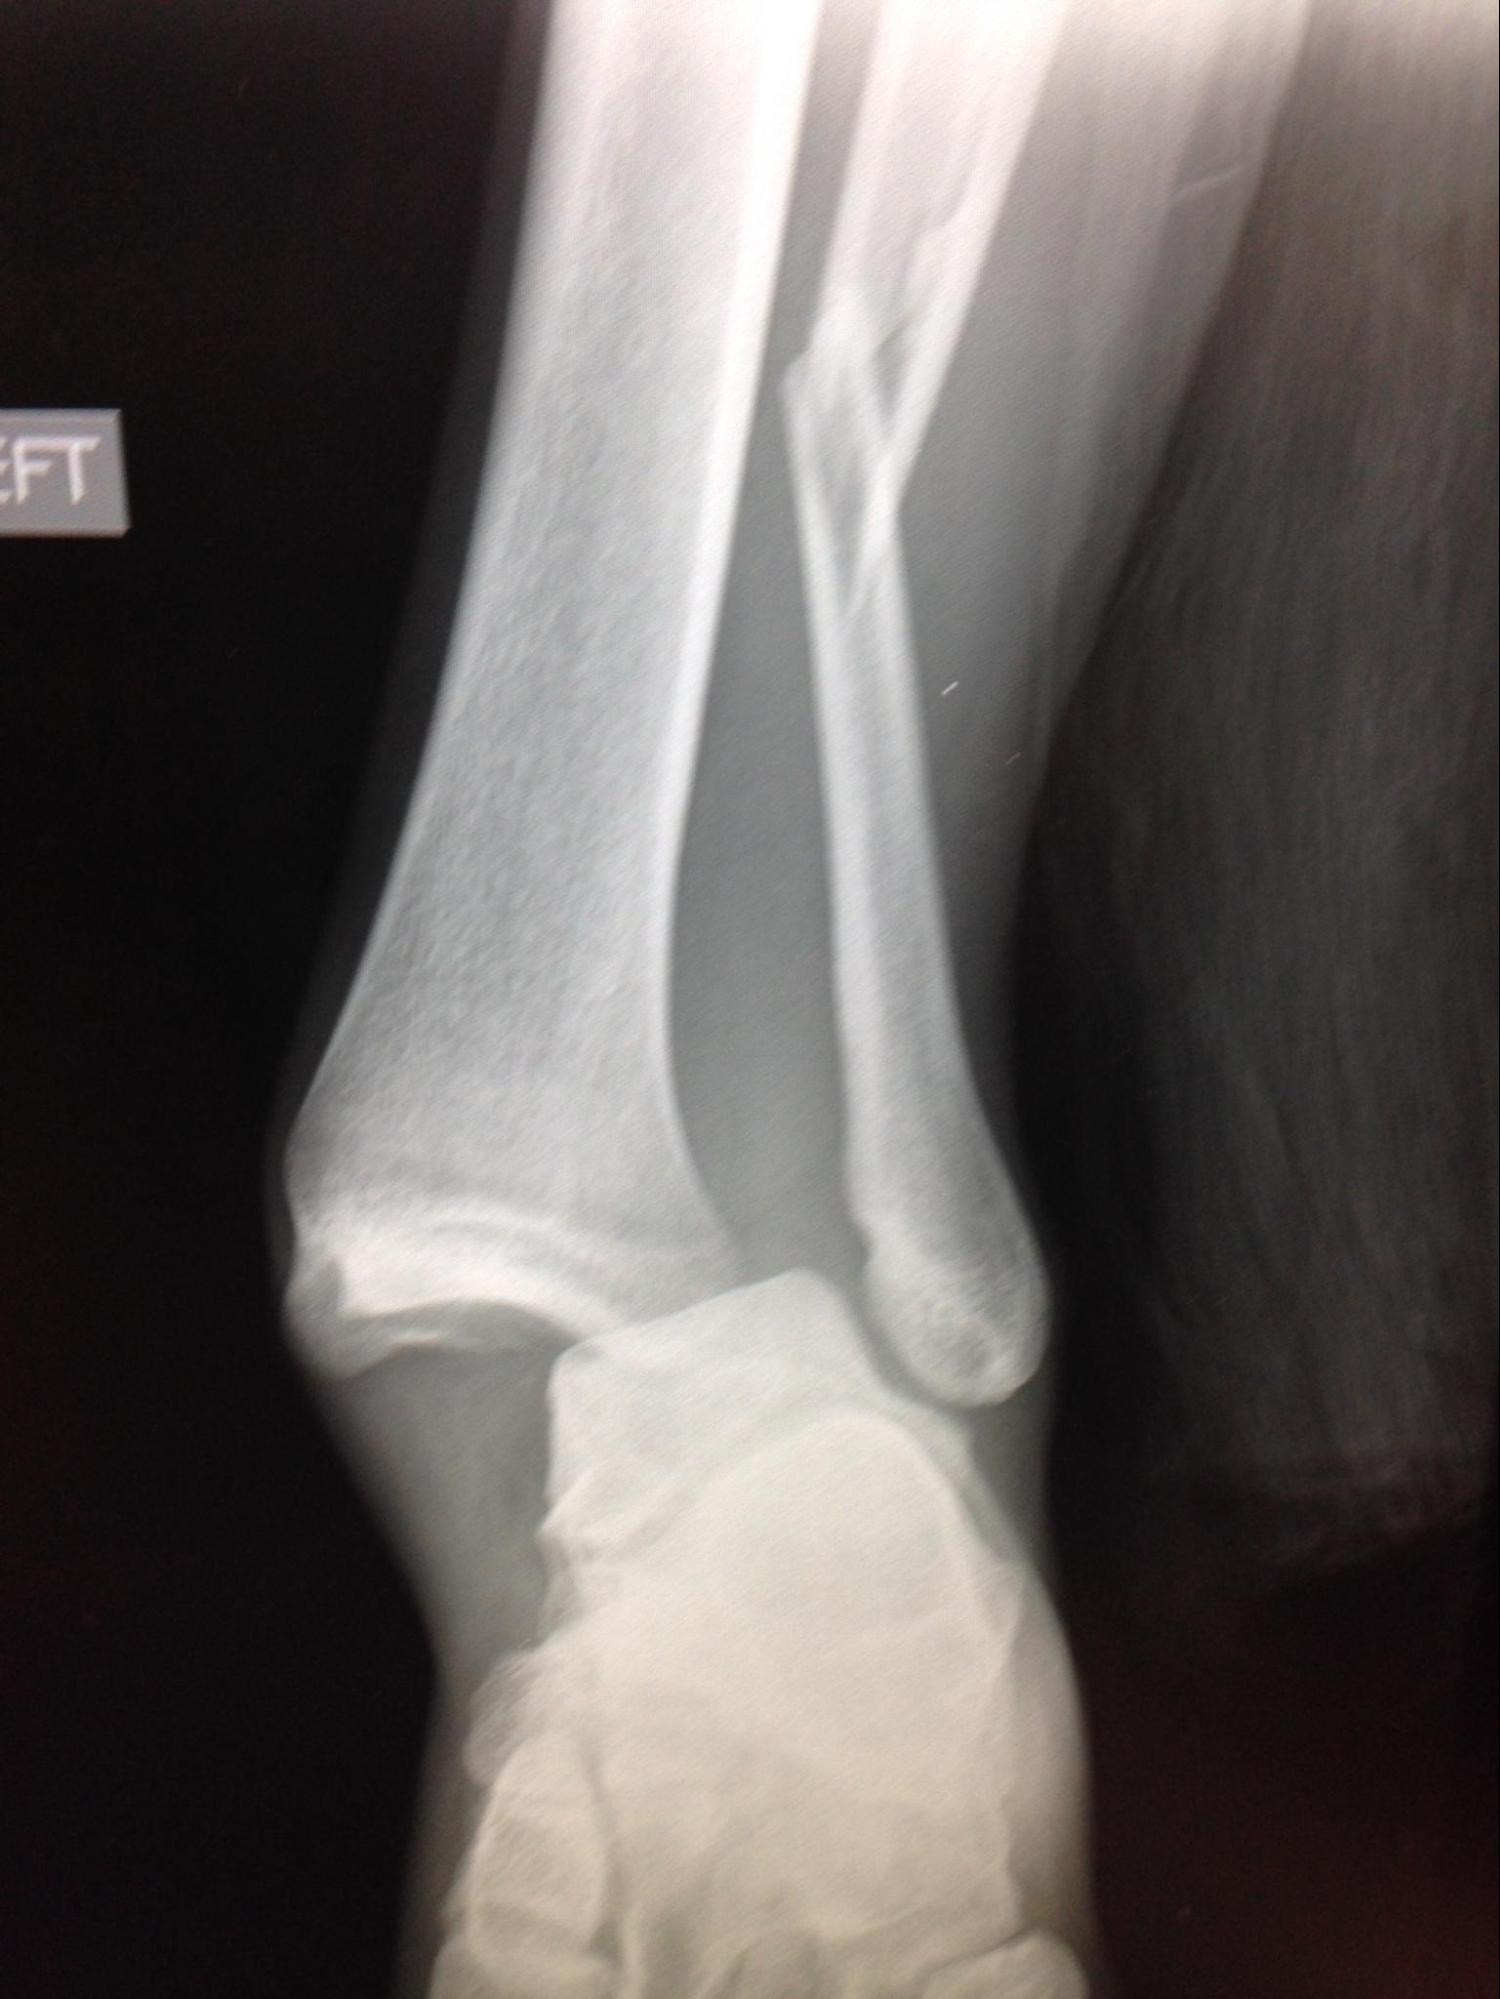 Ankle Fracture
Weber C Ankle fracture with dislocation